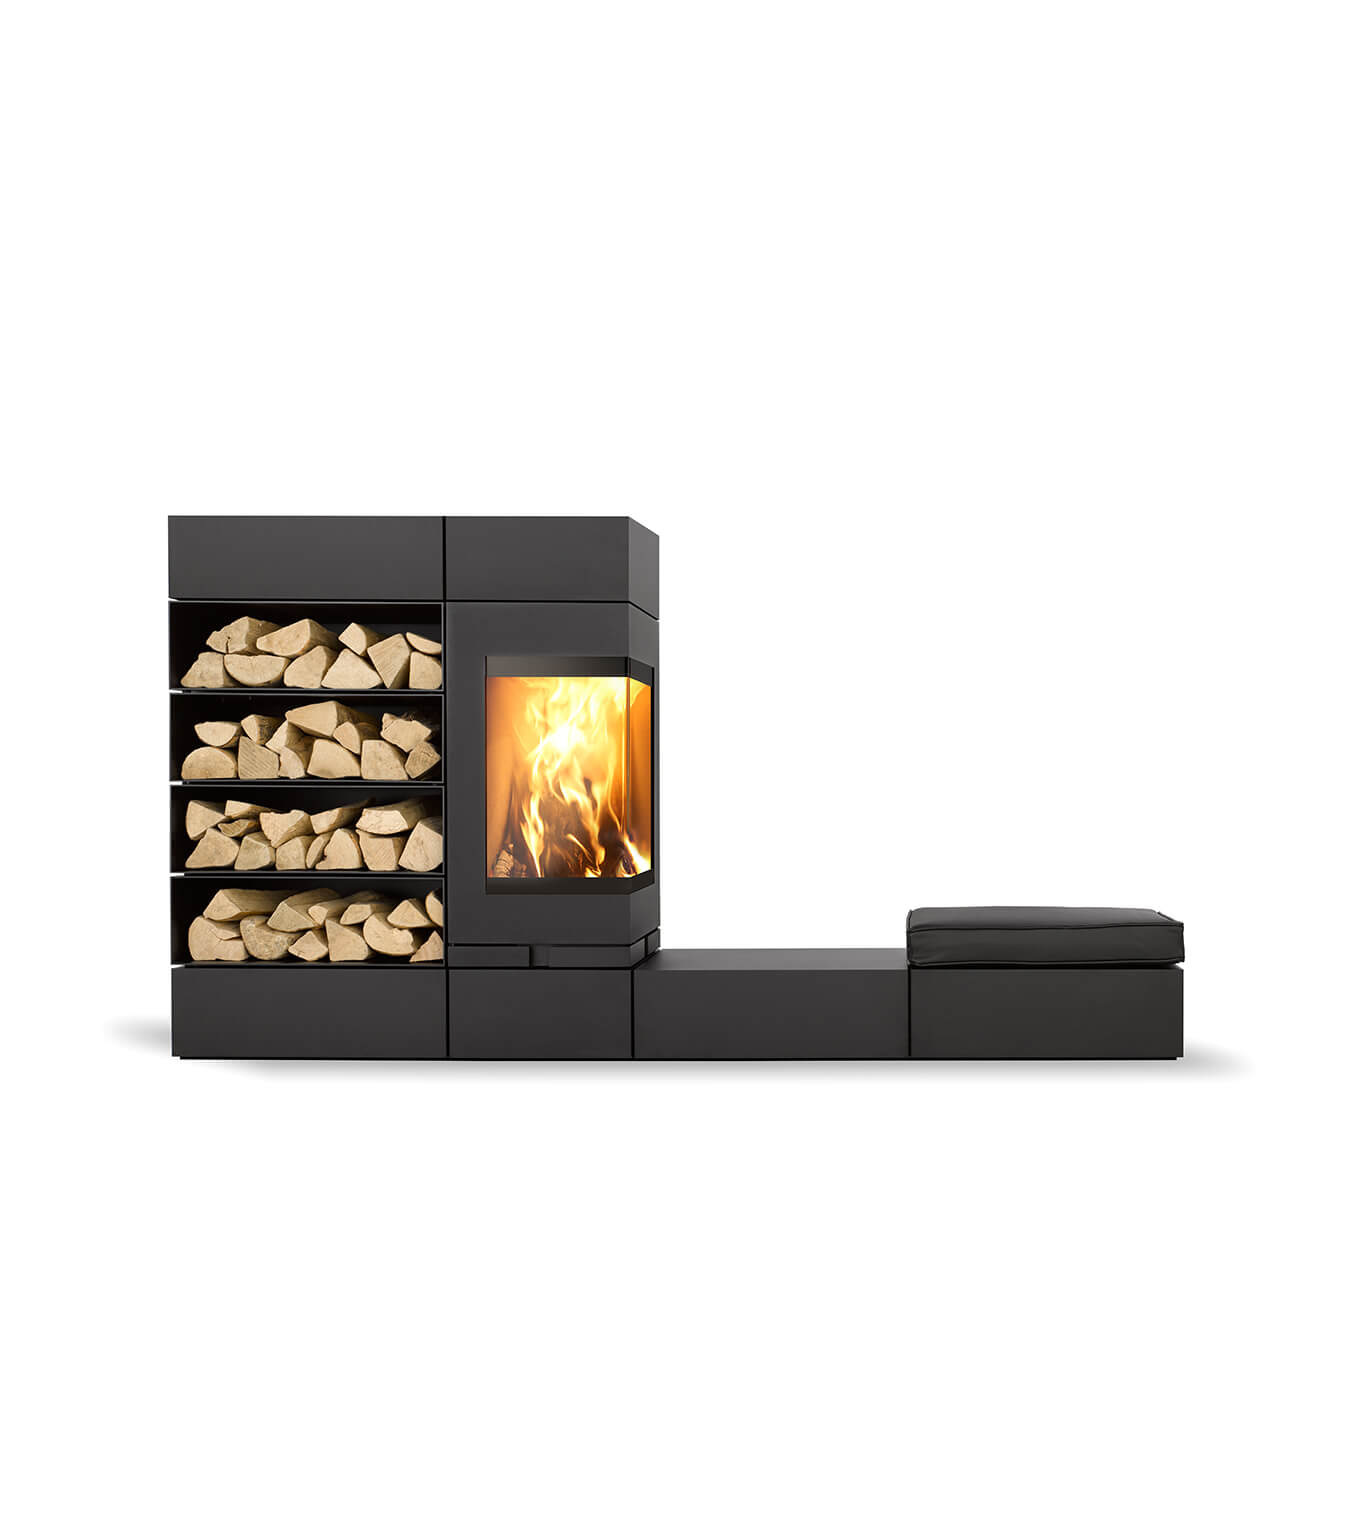 Skantherm Elements 400 freestanding corner fireplace with storage and seating options